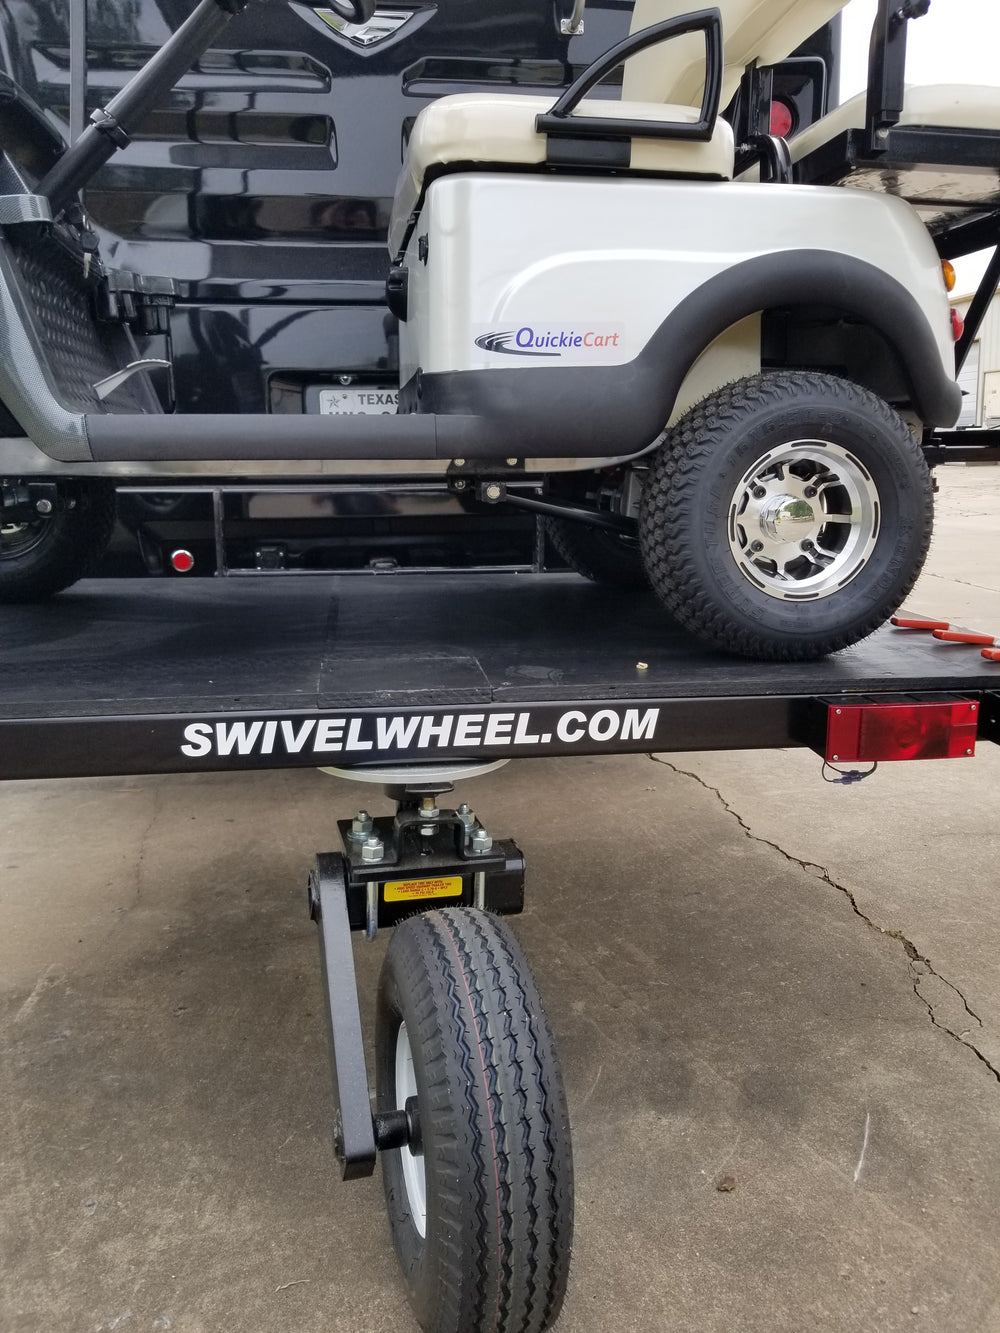 Mini Golf Cart Swivelwheel Hauler/ Carrier – Fastmaster Products